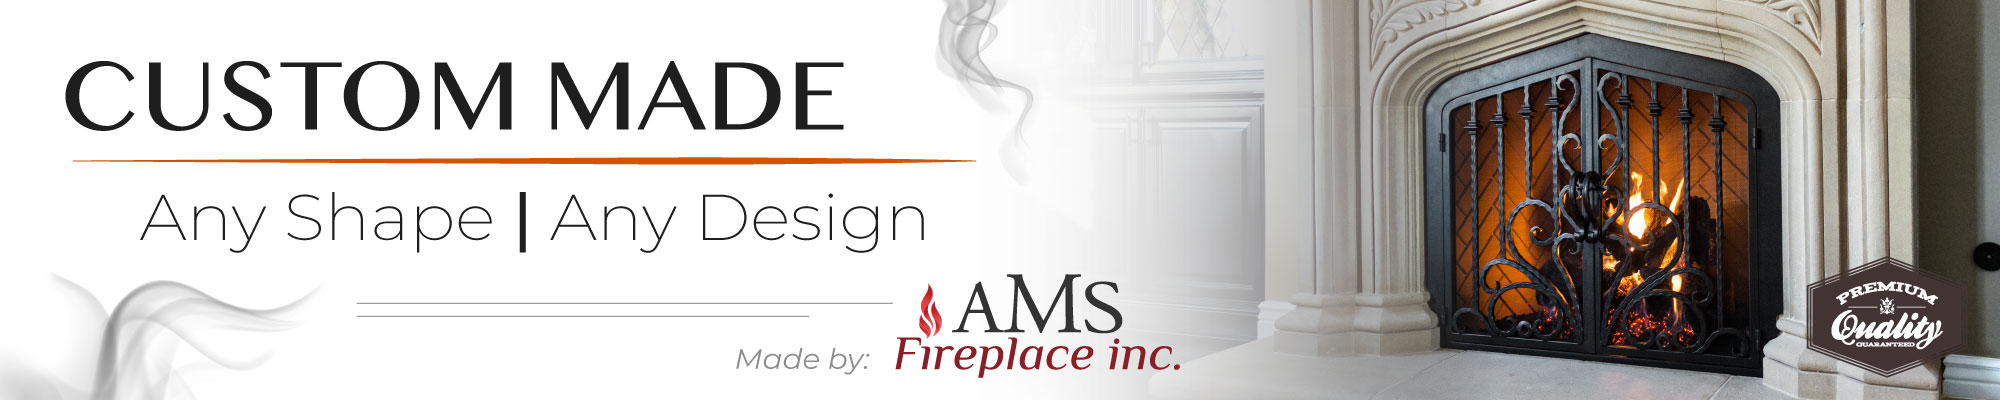 Custom Made Fireplace Doors by AMS Fireplace Banner